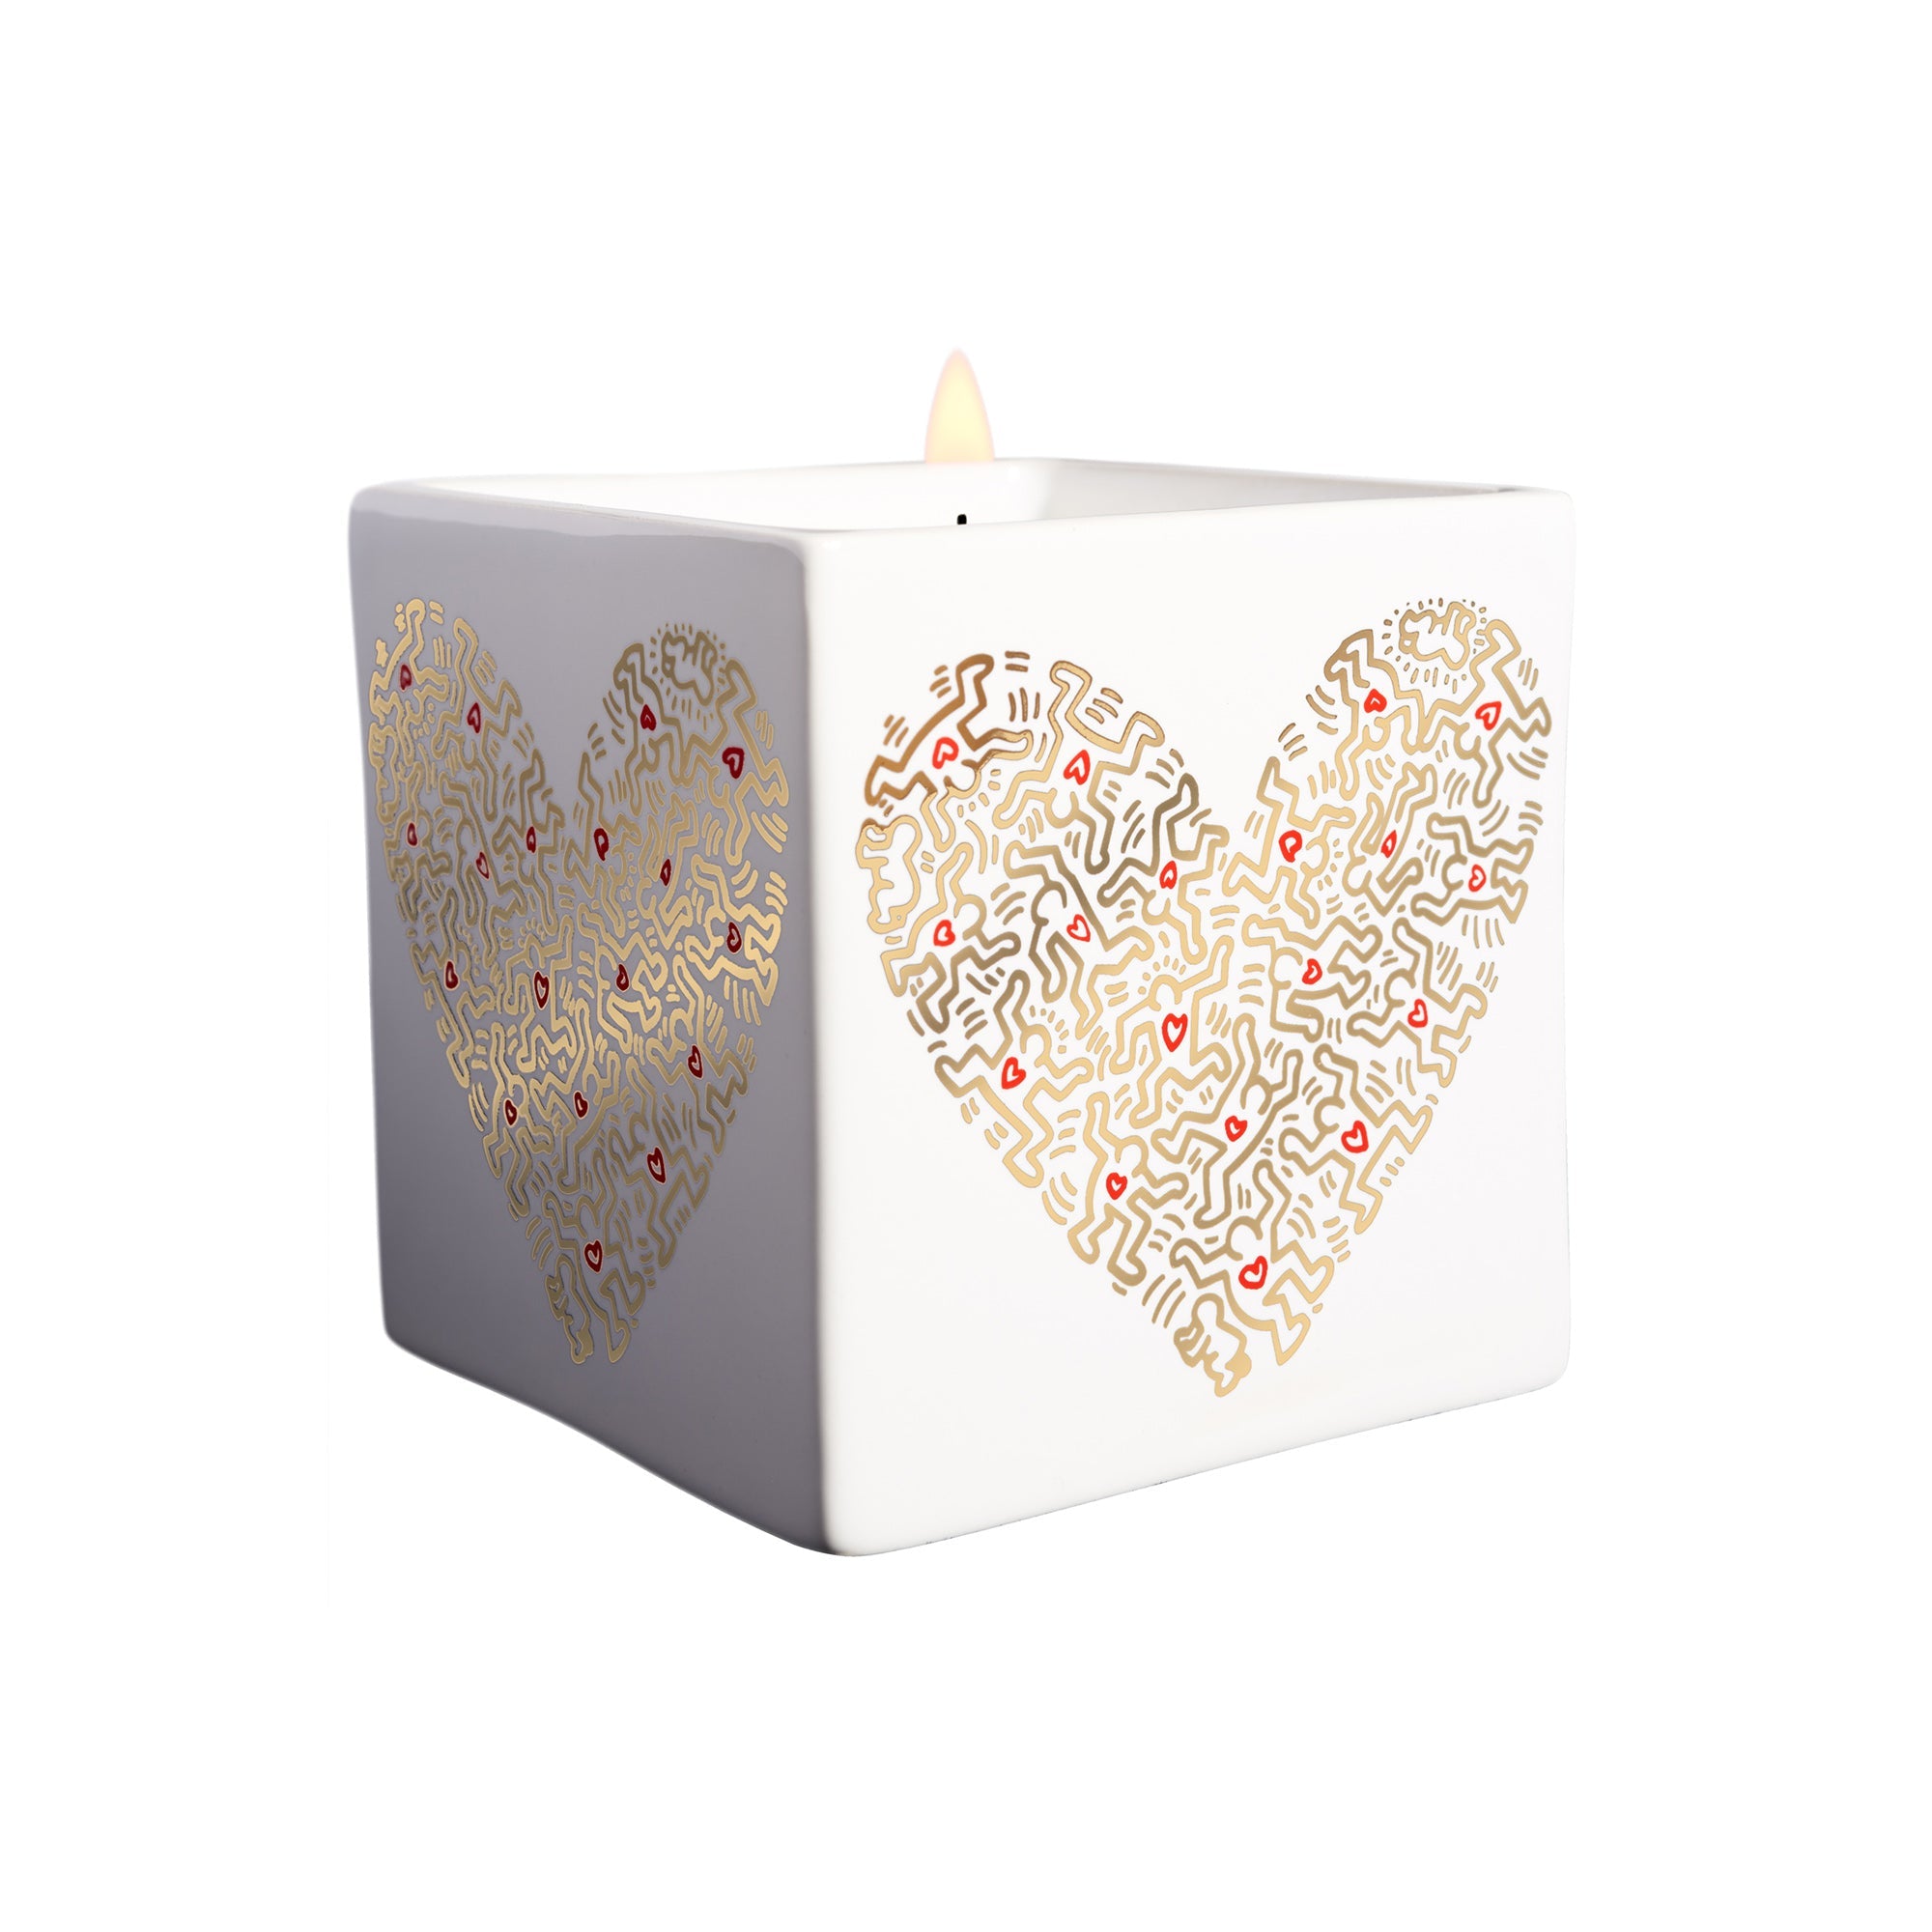 Keith Haring perfumed candle ”Gold Pattern Heart”